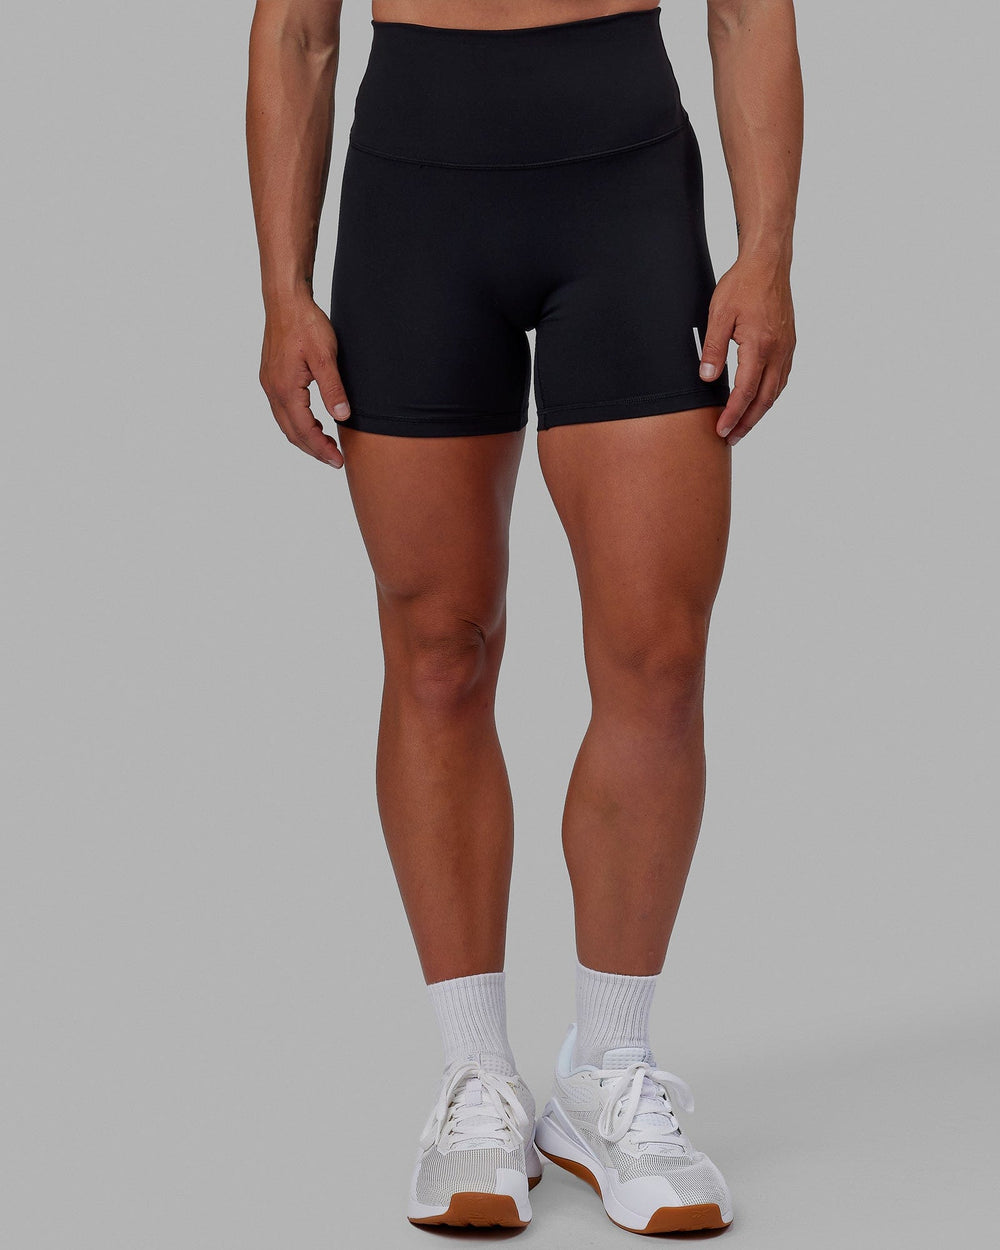 Woman wearing Evolved X-Short Tights - Black-White